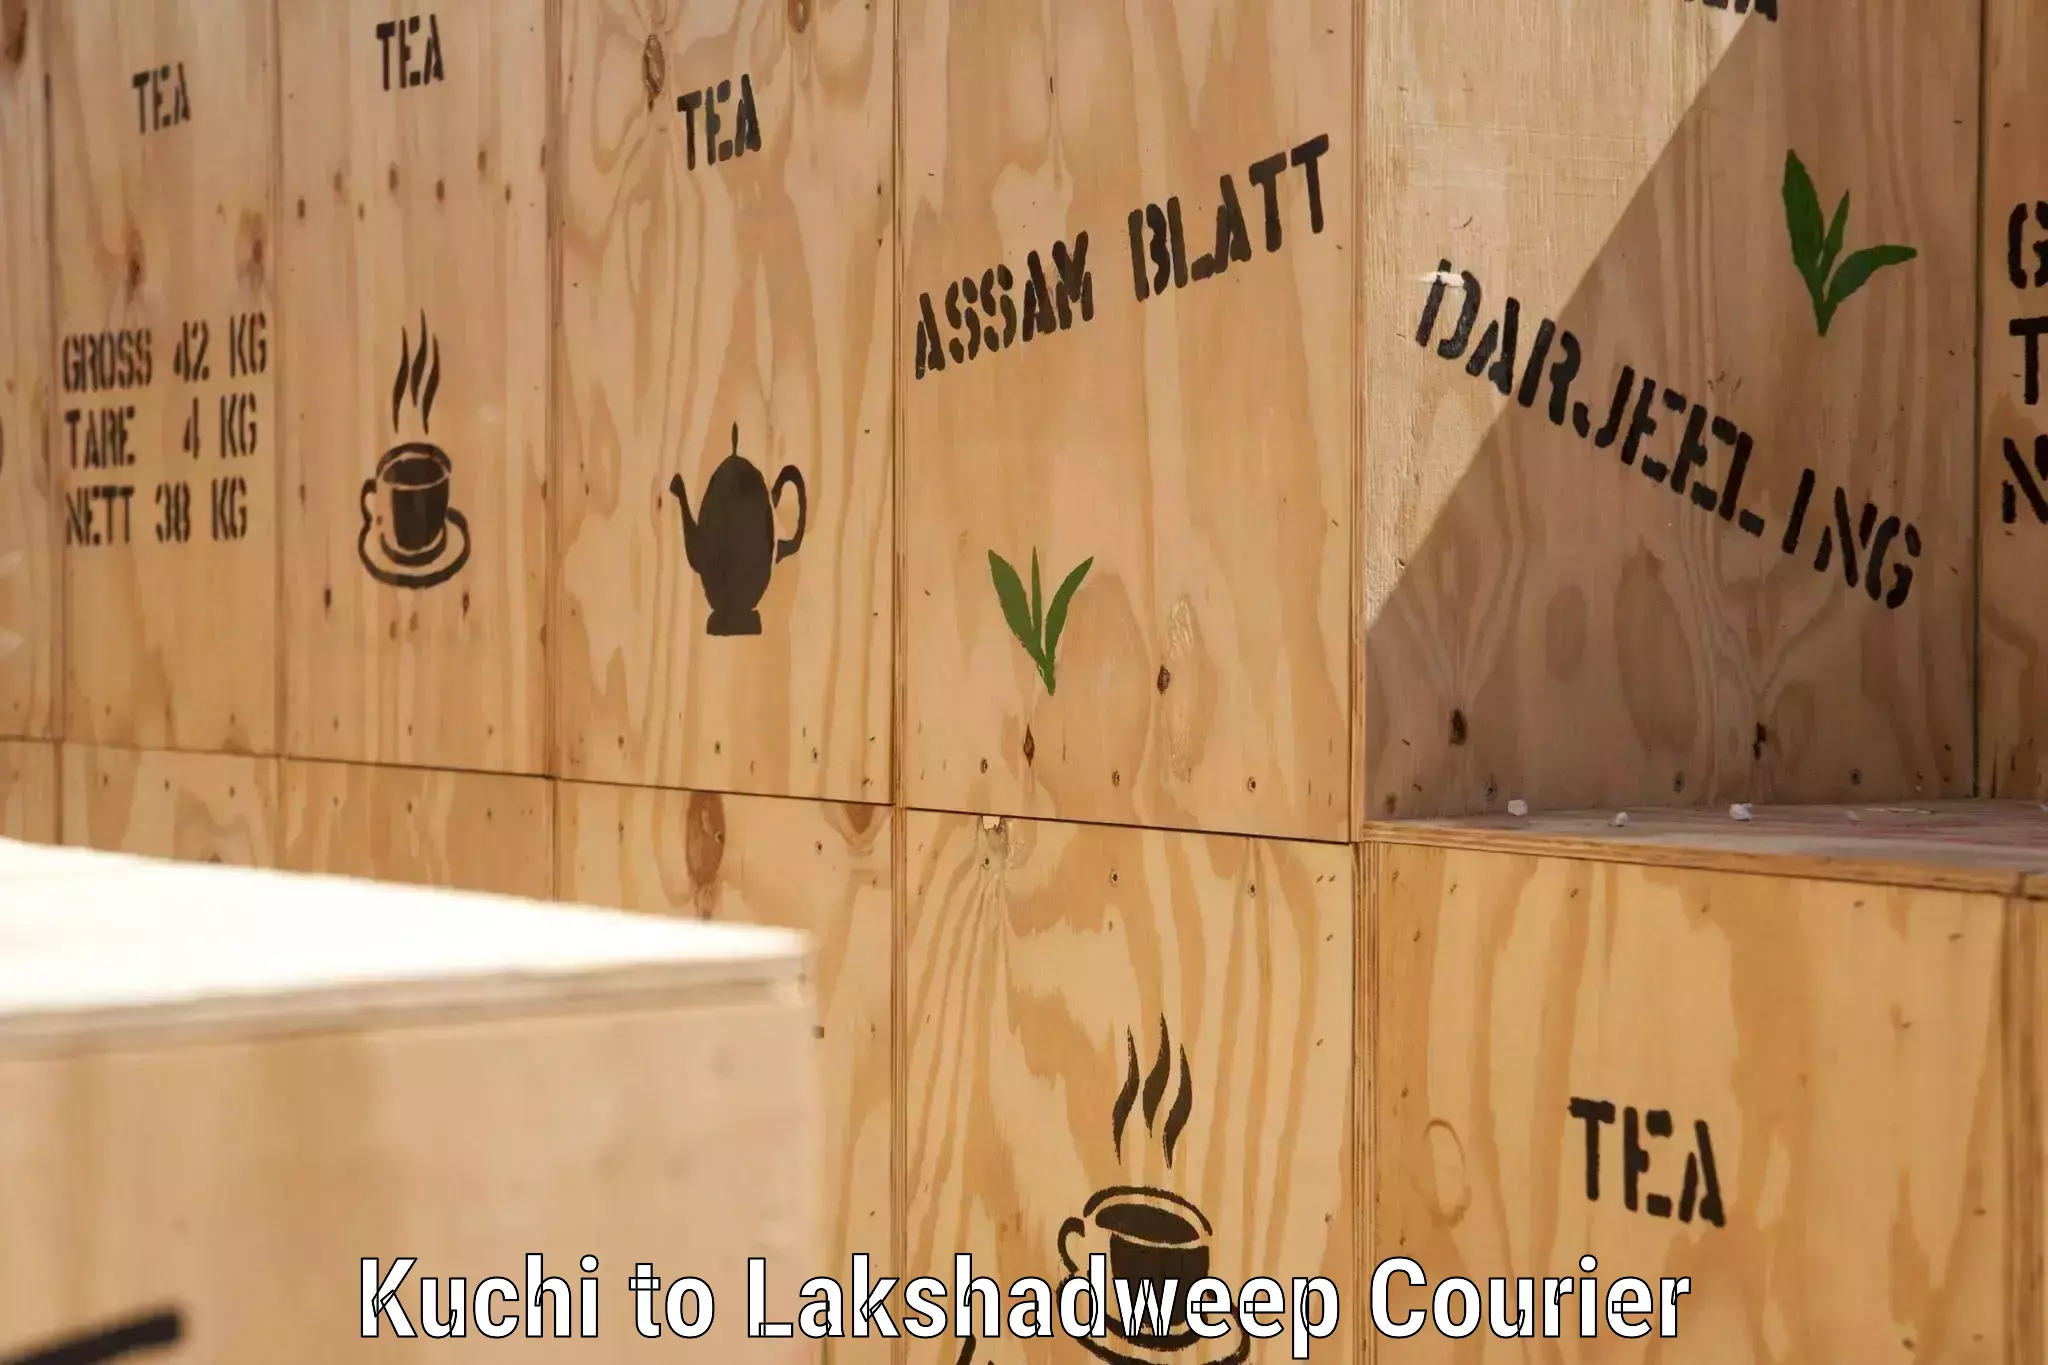 User-friendly delivery service in Kuchi to Lakshadweep